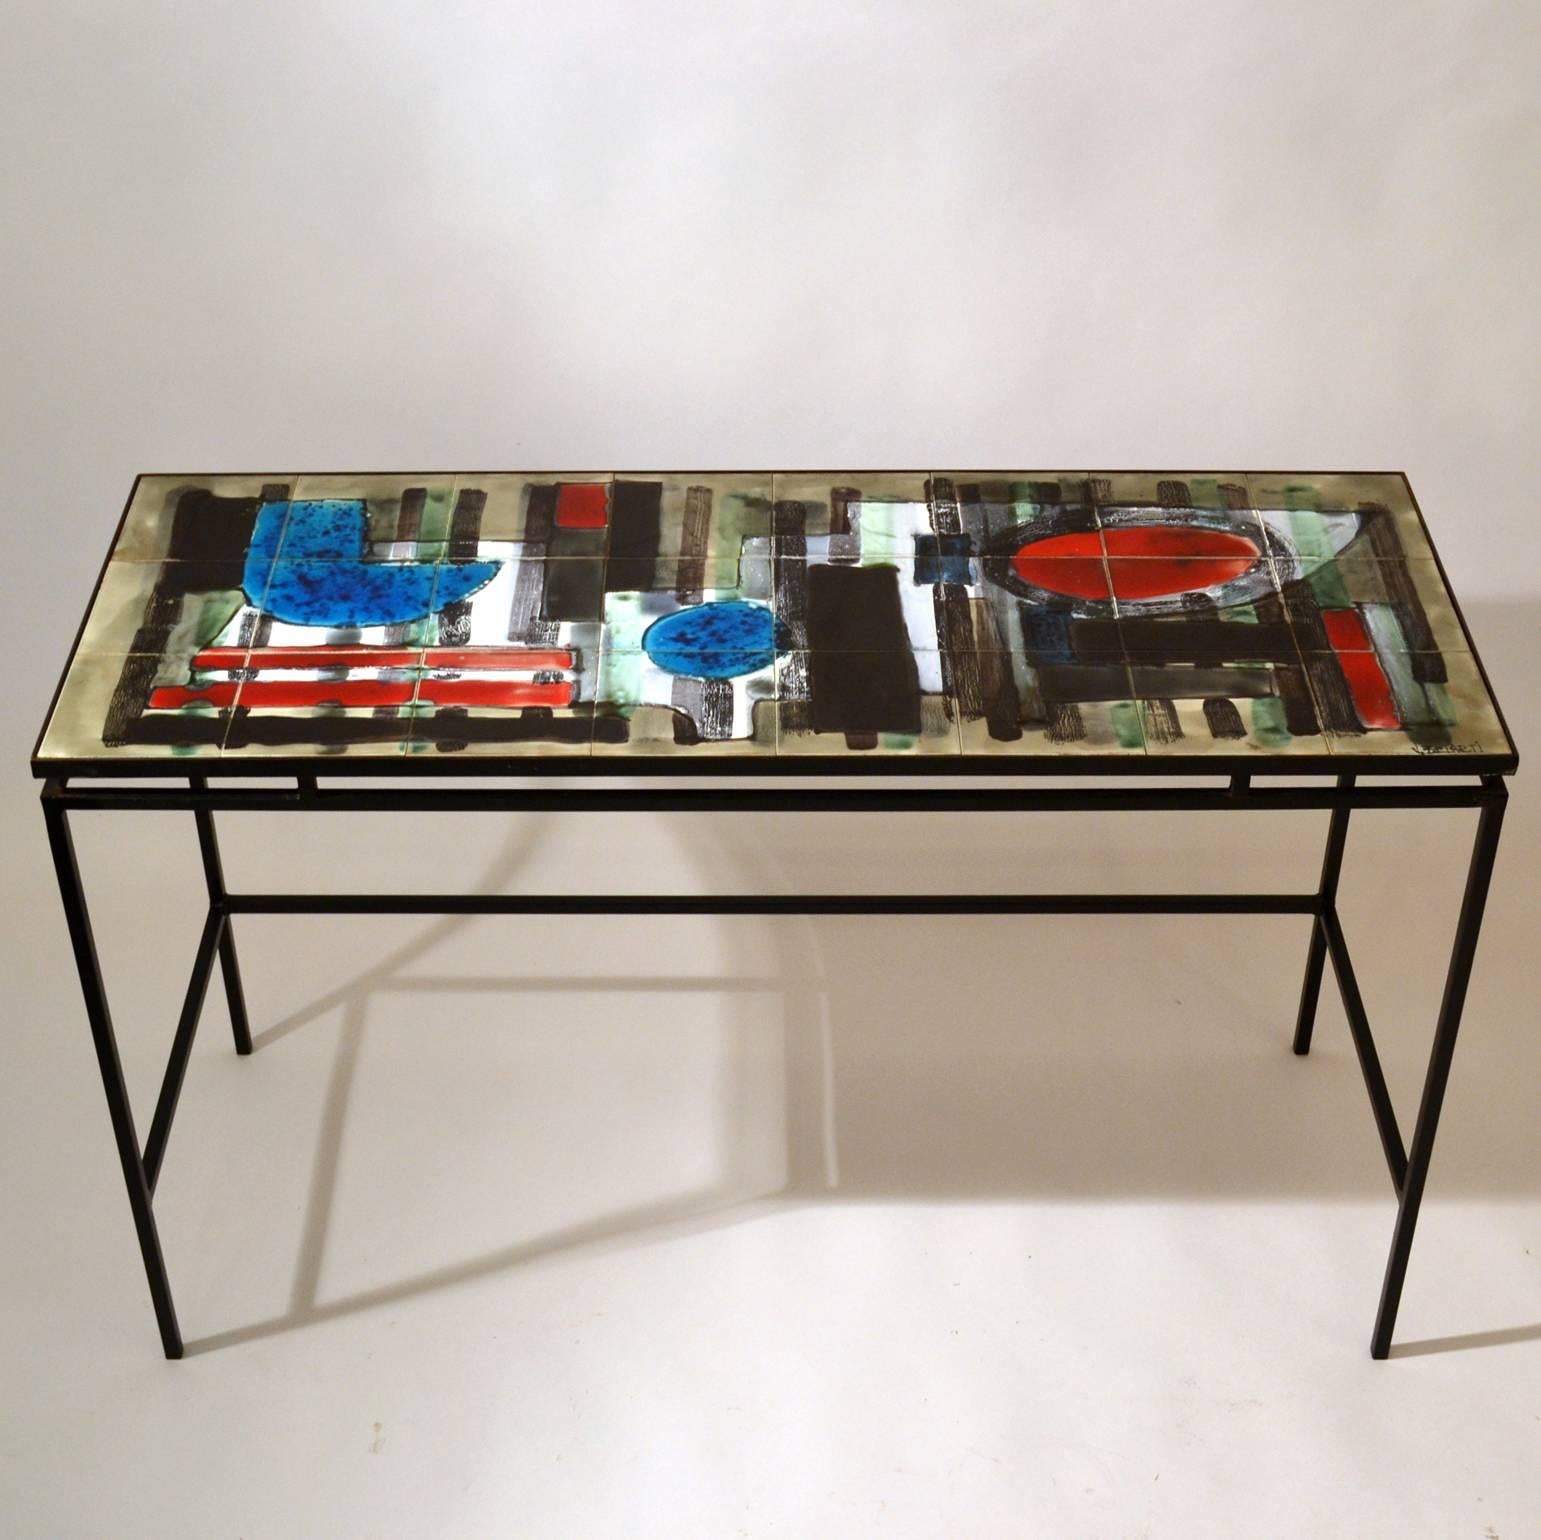 Modernist desk or console table with hand painted tiled top in abstract design with splashes of bright colors red and blue on a suspended black metal frame, signed by Juliette Belarti, Belgium, circa 1960.
  